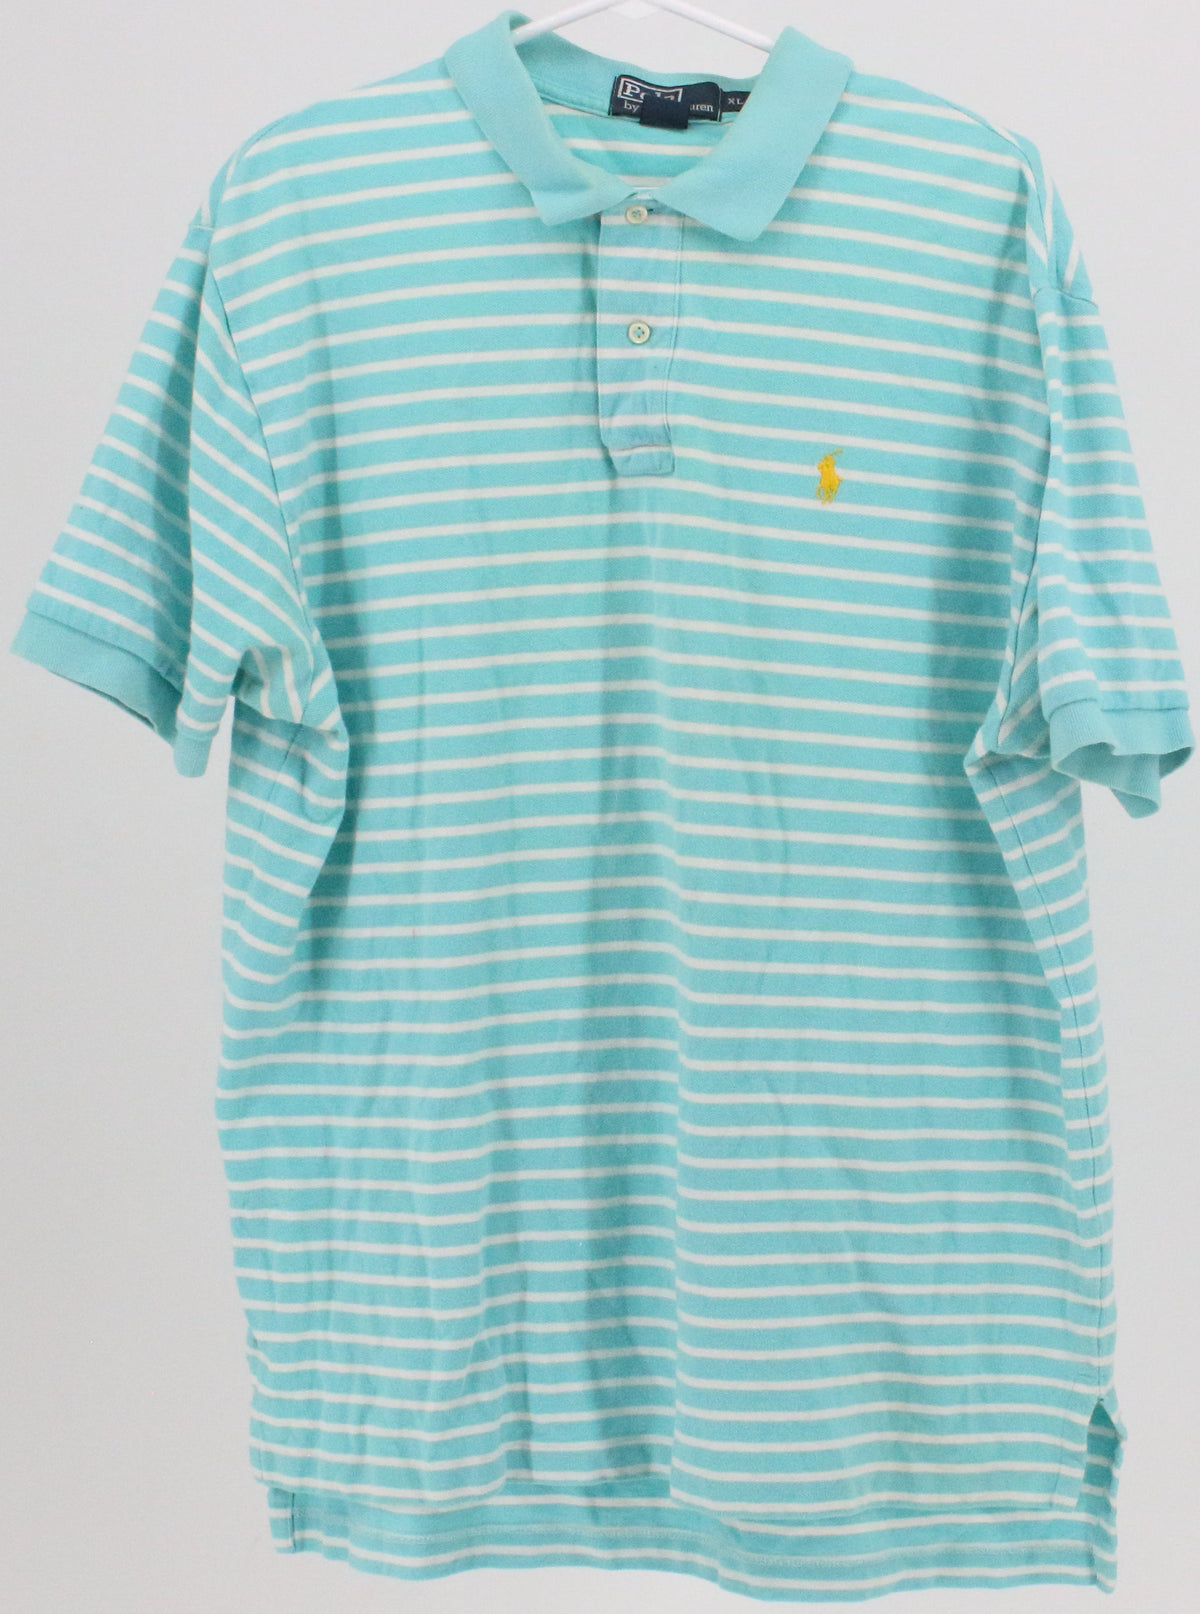 Polo by Ralph Lauren Turquoise and White Striped Golf Shirt